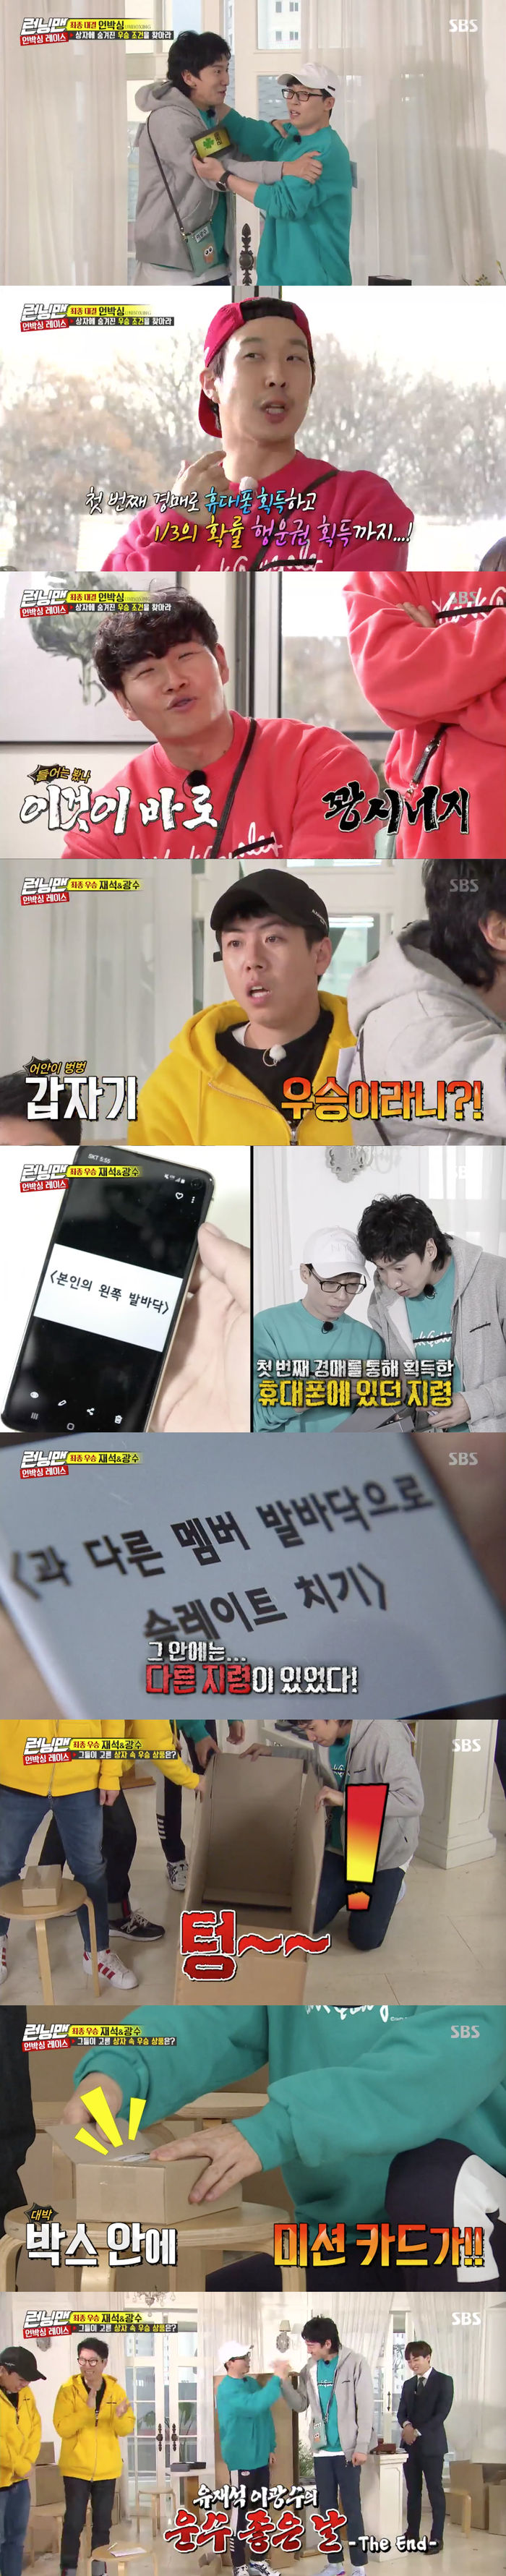 Yoo Jae-Suk and Lee Kwang-soo won the final.On SBS Running Man broadcasted on the 17th, Unboxing Race was held.On the day of the show, the members bartered their own items and other items, and obtained the auction fee according to the results of the emotions of the items exchanged.As a result, the Yoo Jae-Suk and Lee Kwang-soo teams won the highest auction costs; it followed up to good luck for the Yoo Jae-Suk team, which was rich in auction costs.The unboxing box, which was acquired at a very low price, had a cell phone hidden in the championship order.Even afterward, Yoo Jae-Suk and Lee Kwang-soo picked a box with only one lucky spot hidden out of several boxes.Yoo Jae-Suk and Lee Kwang-soo removed the box they chose and finally Choices the single box they did not Choice.Surprisingly, there was only one lucky spot hidden in the box: the encounter between the kangson and the kangson, which created an amazing synergy.The Yoo Jae-Suk team then released another box, and there was a cell phone with the winning order hidden.So, Quangson Yoe-Suk and Lee Kwang-soo found out the winning order to hit the slate with each others feet and won the final.The two finalists said they would give one of the remaining unboxing boxes as a gift.So Yoo Jae-Suk and Lee Kwang-soo each picked the biggest box and the smallest box.As a result, the large Lee Kwang-soos box was an empty box that did not hold anything; Lee Kwang-soo was greatly despaired.The box of Yoo Jae-Suk was then released; the box picked by Yoo Jae-Suk had hidden the winning order.The box, which had been hidden so far, had a cell phone, so I raised my expectation.However, Yoo Jae-Suks box contains rope skipping, confirming their strength as a bang-on, and the Good Day of Transportation ended.